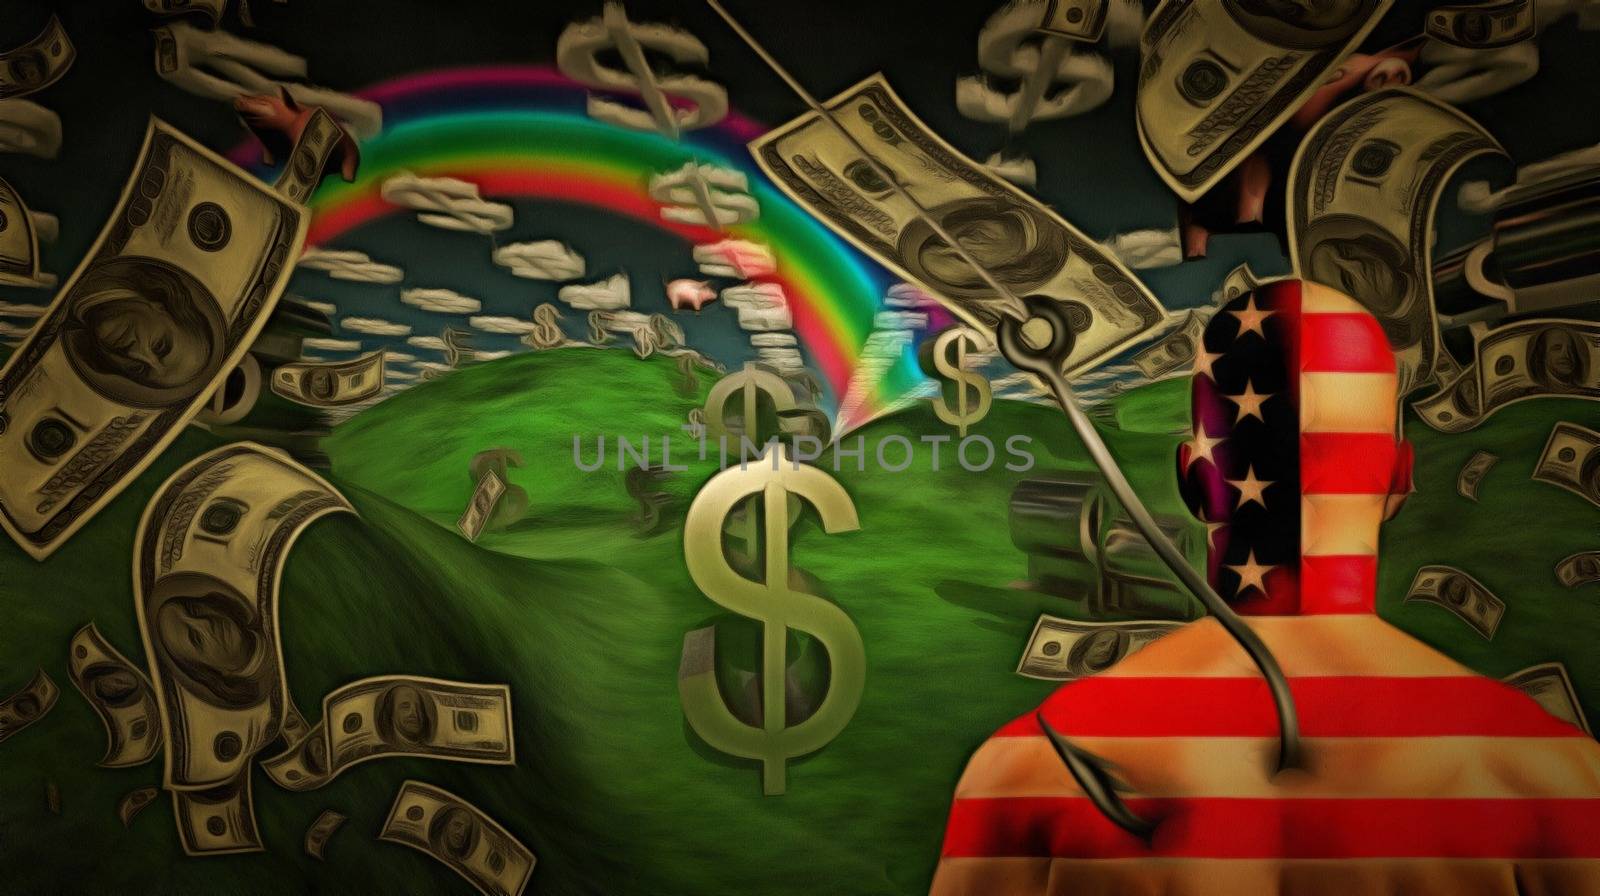 Surreal painting. Man in US national colors on a hook. Clouds in shape of dollar sign, rain of dollars.